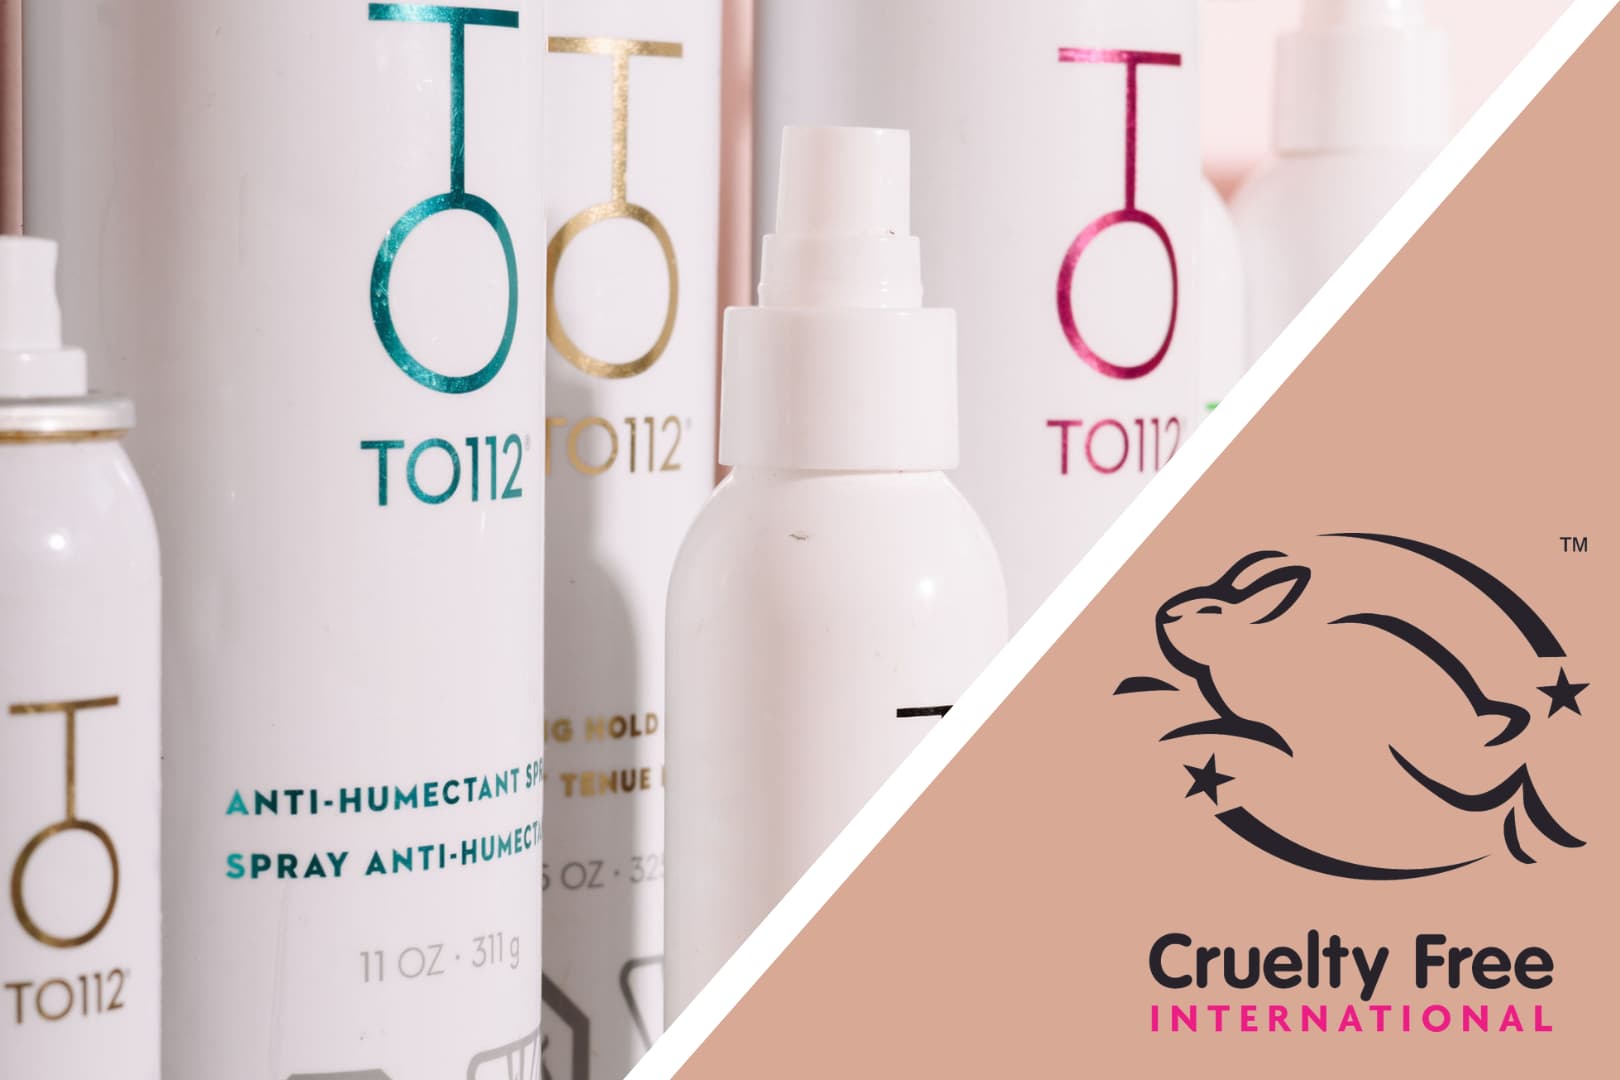 Media Spotlight TO112 Leaping Bunny Certified Cruelty Free